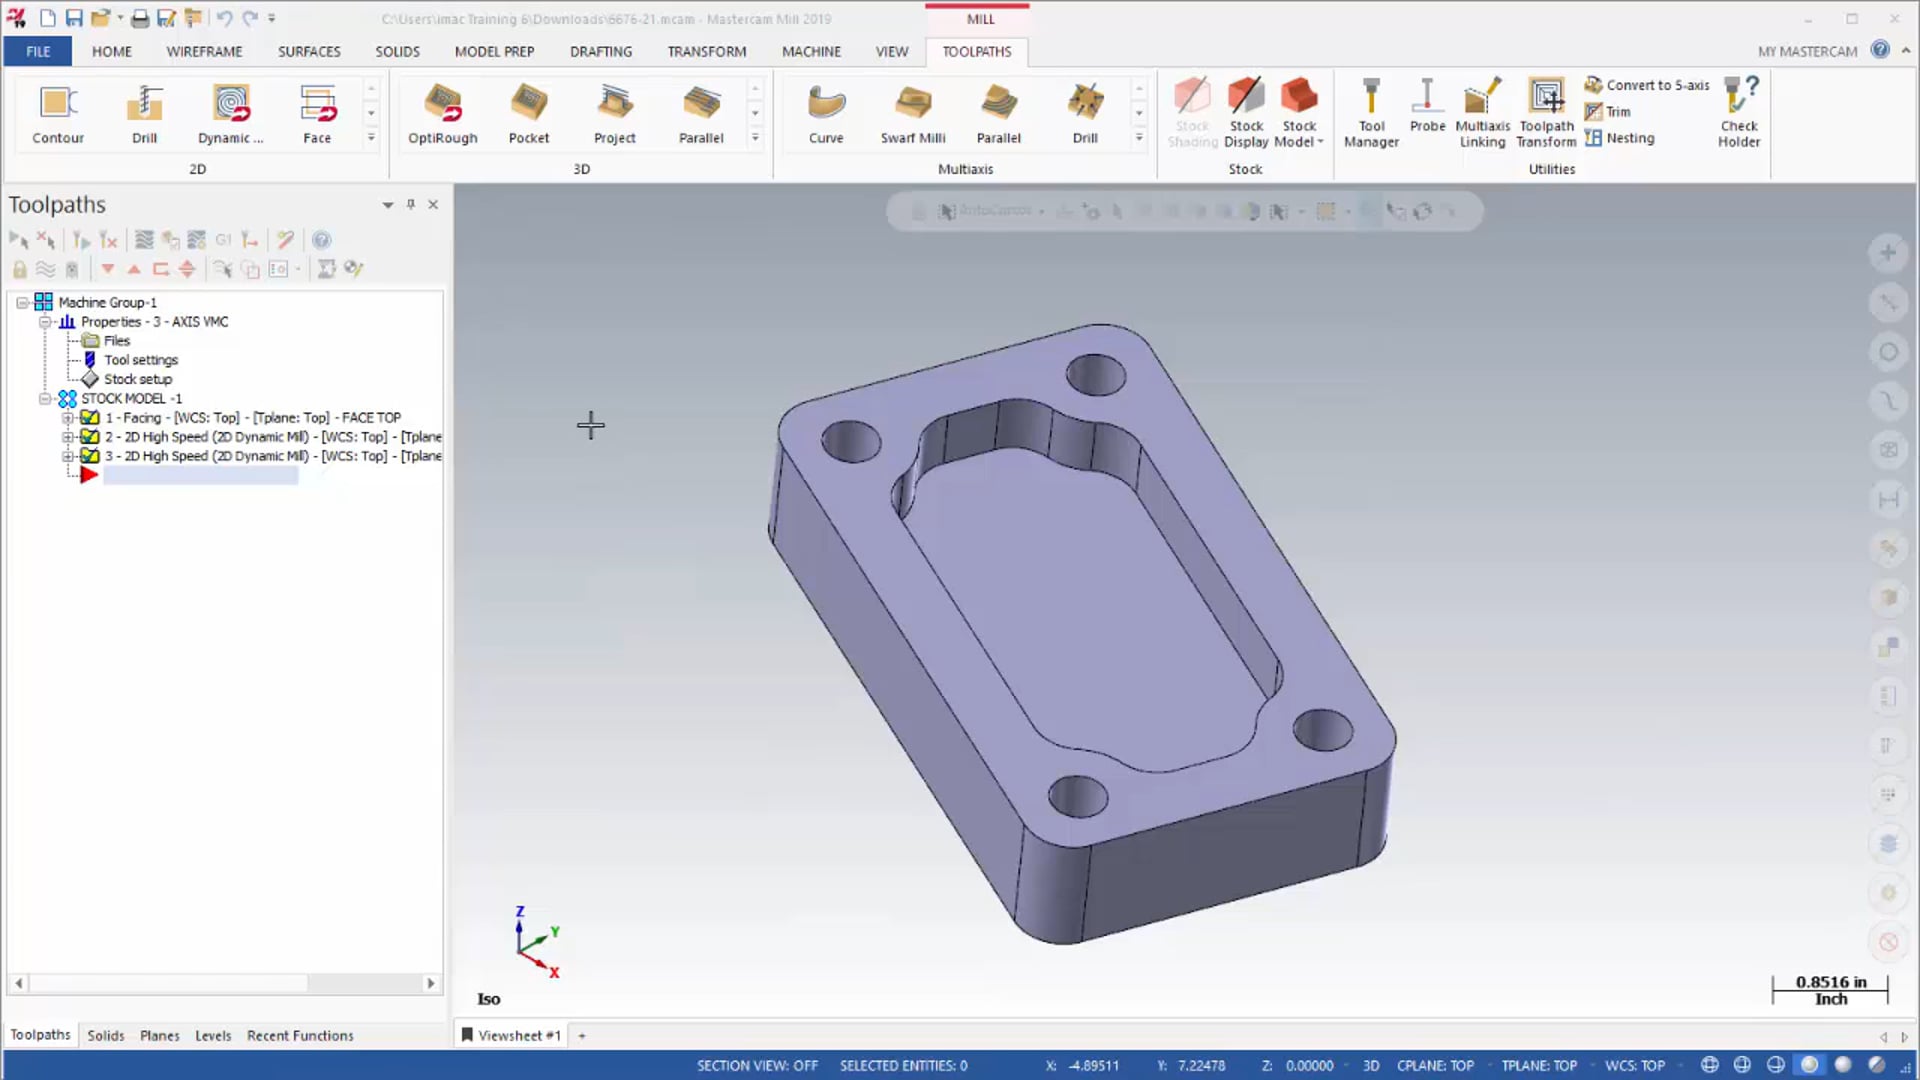 Toolpath and Machining Management